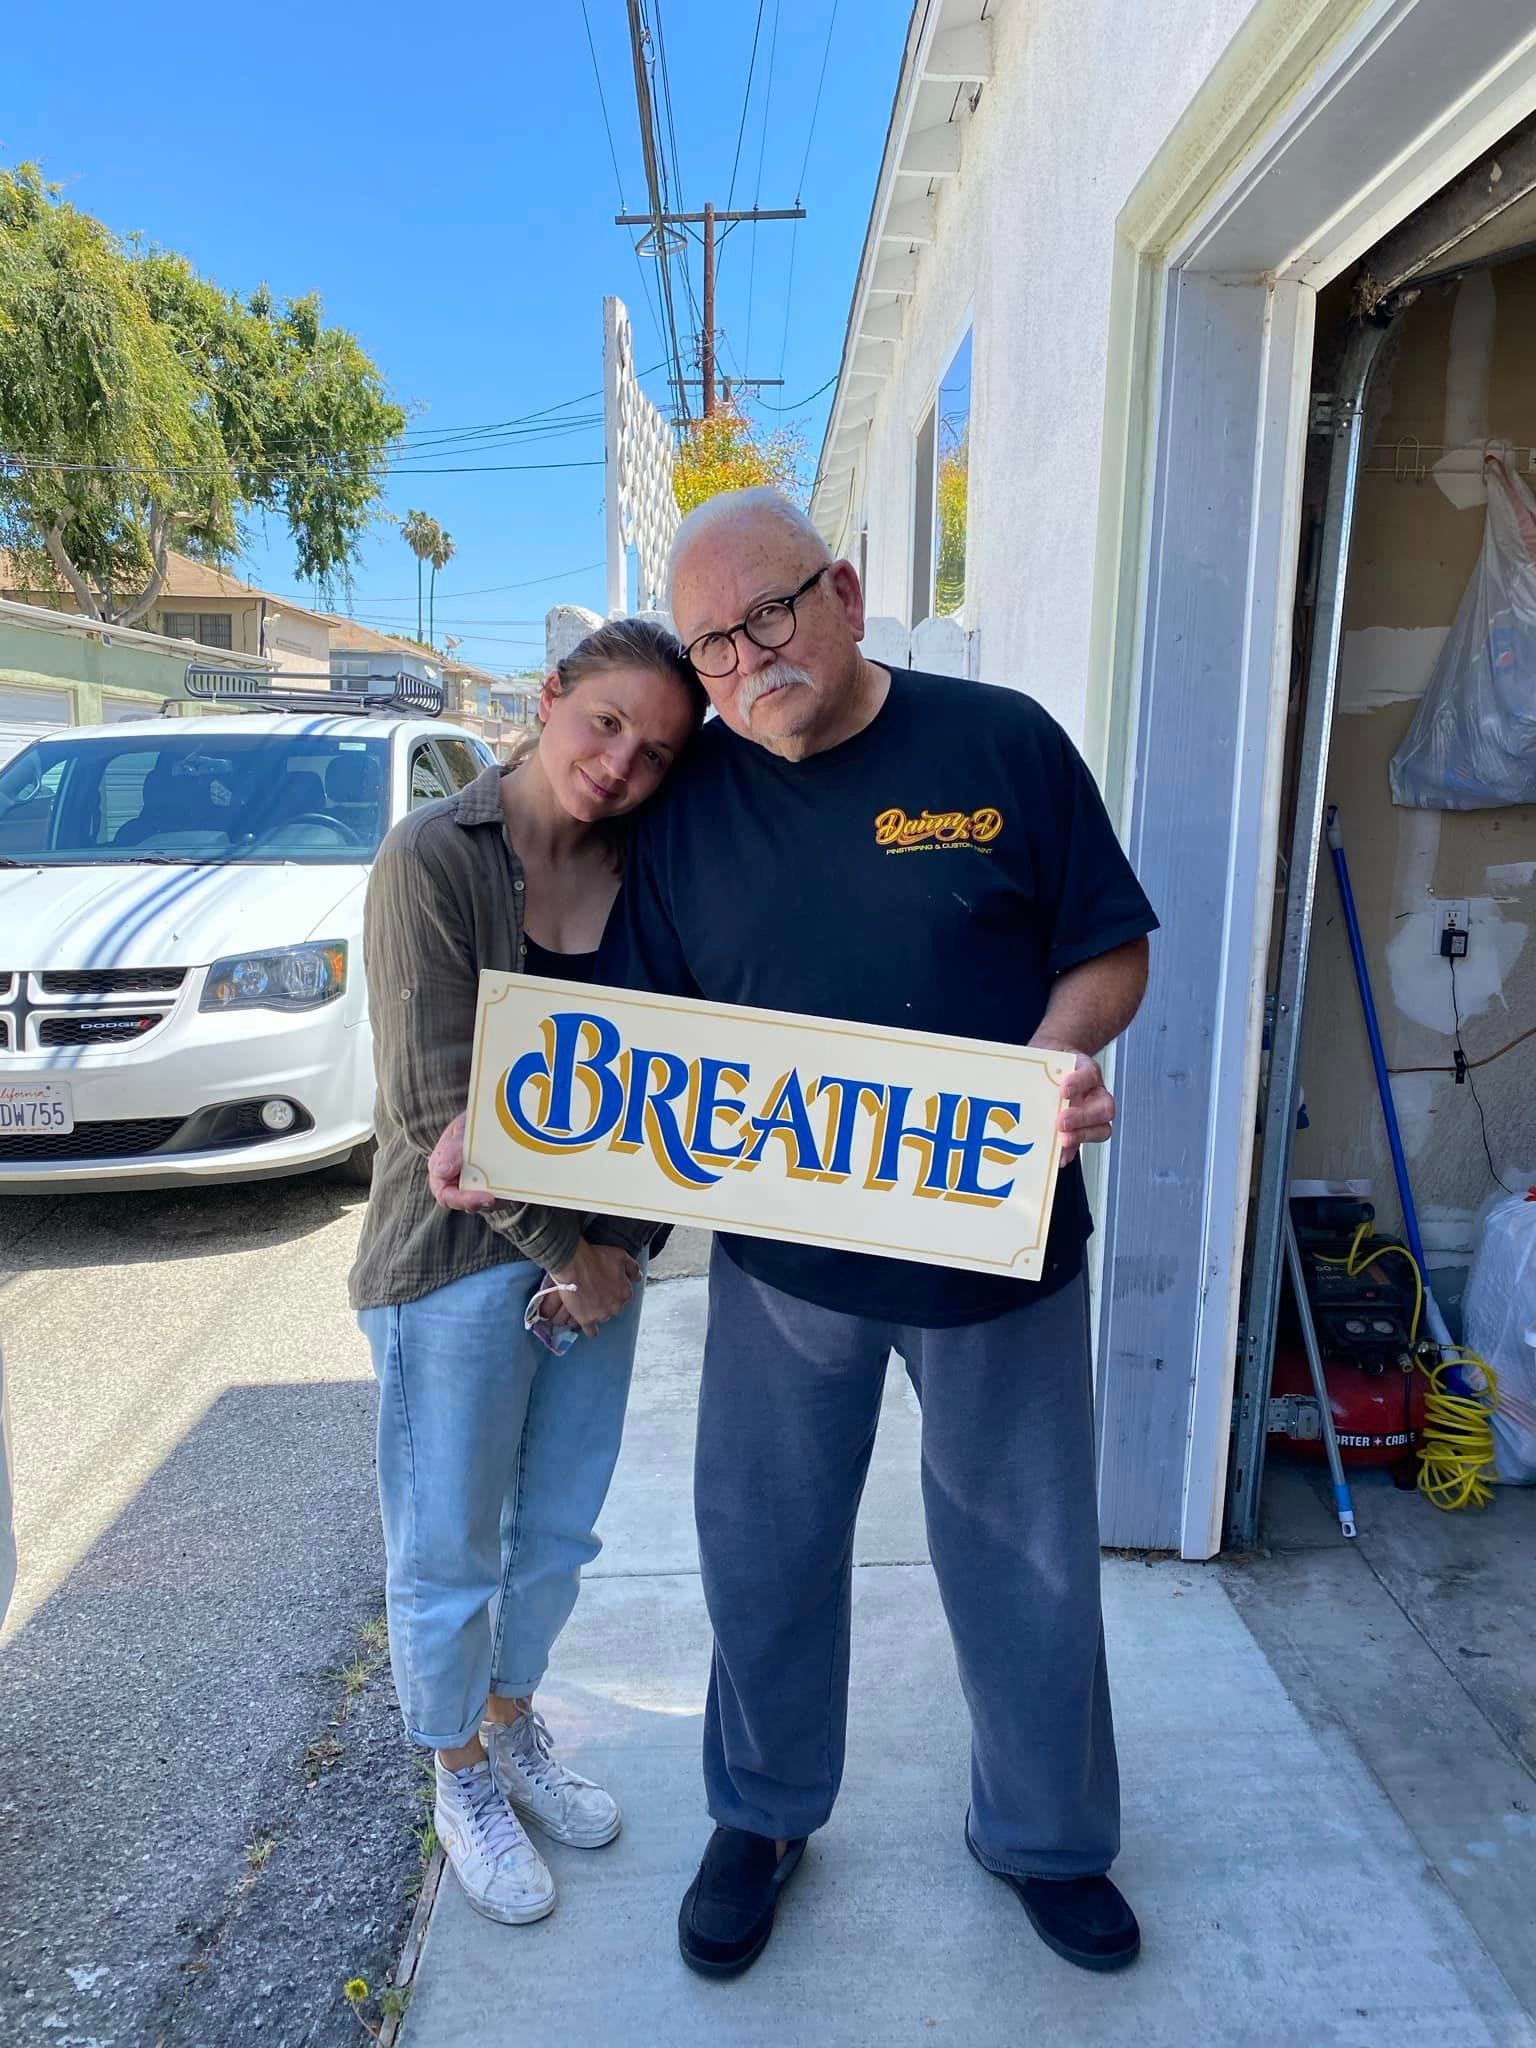 Man and woman posing in the shade on a sunny street holding a hand-painted sign that says 'Breathe'.